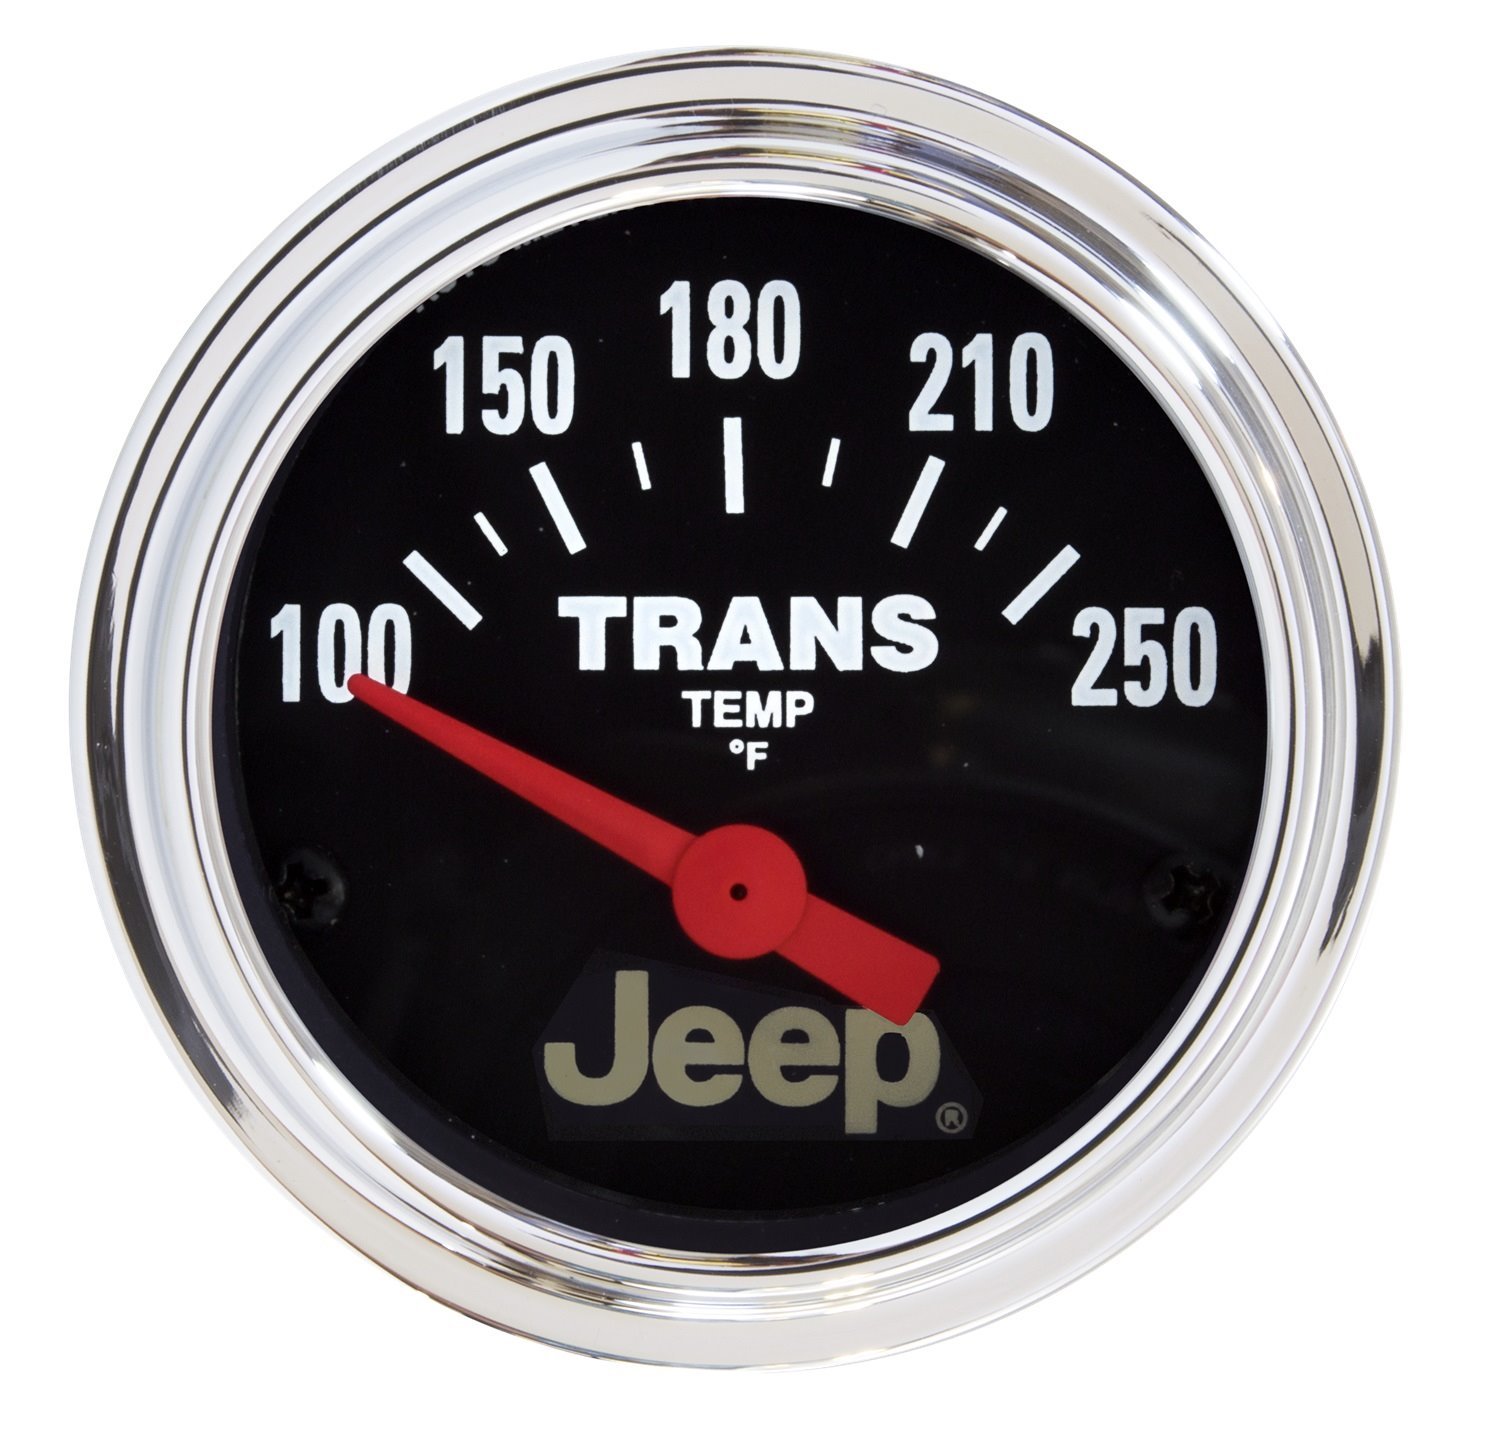 Officially Licensed Jeep Transmission Temperature Gauge 2-1/16" Electrical (Short Sweep)